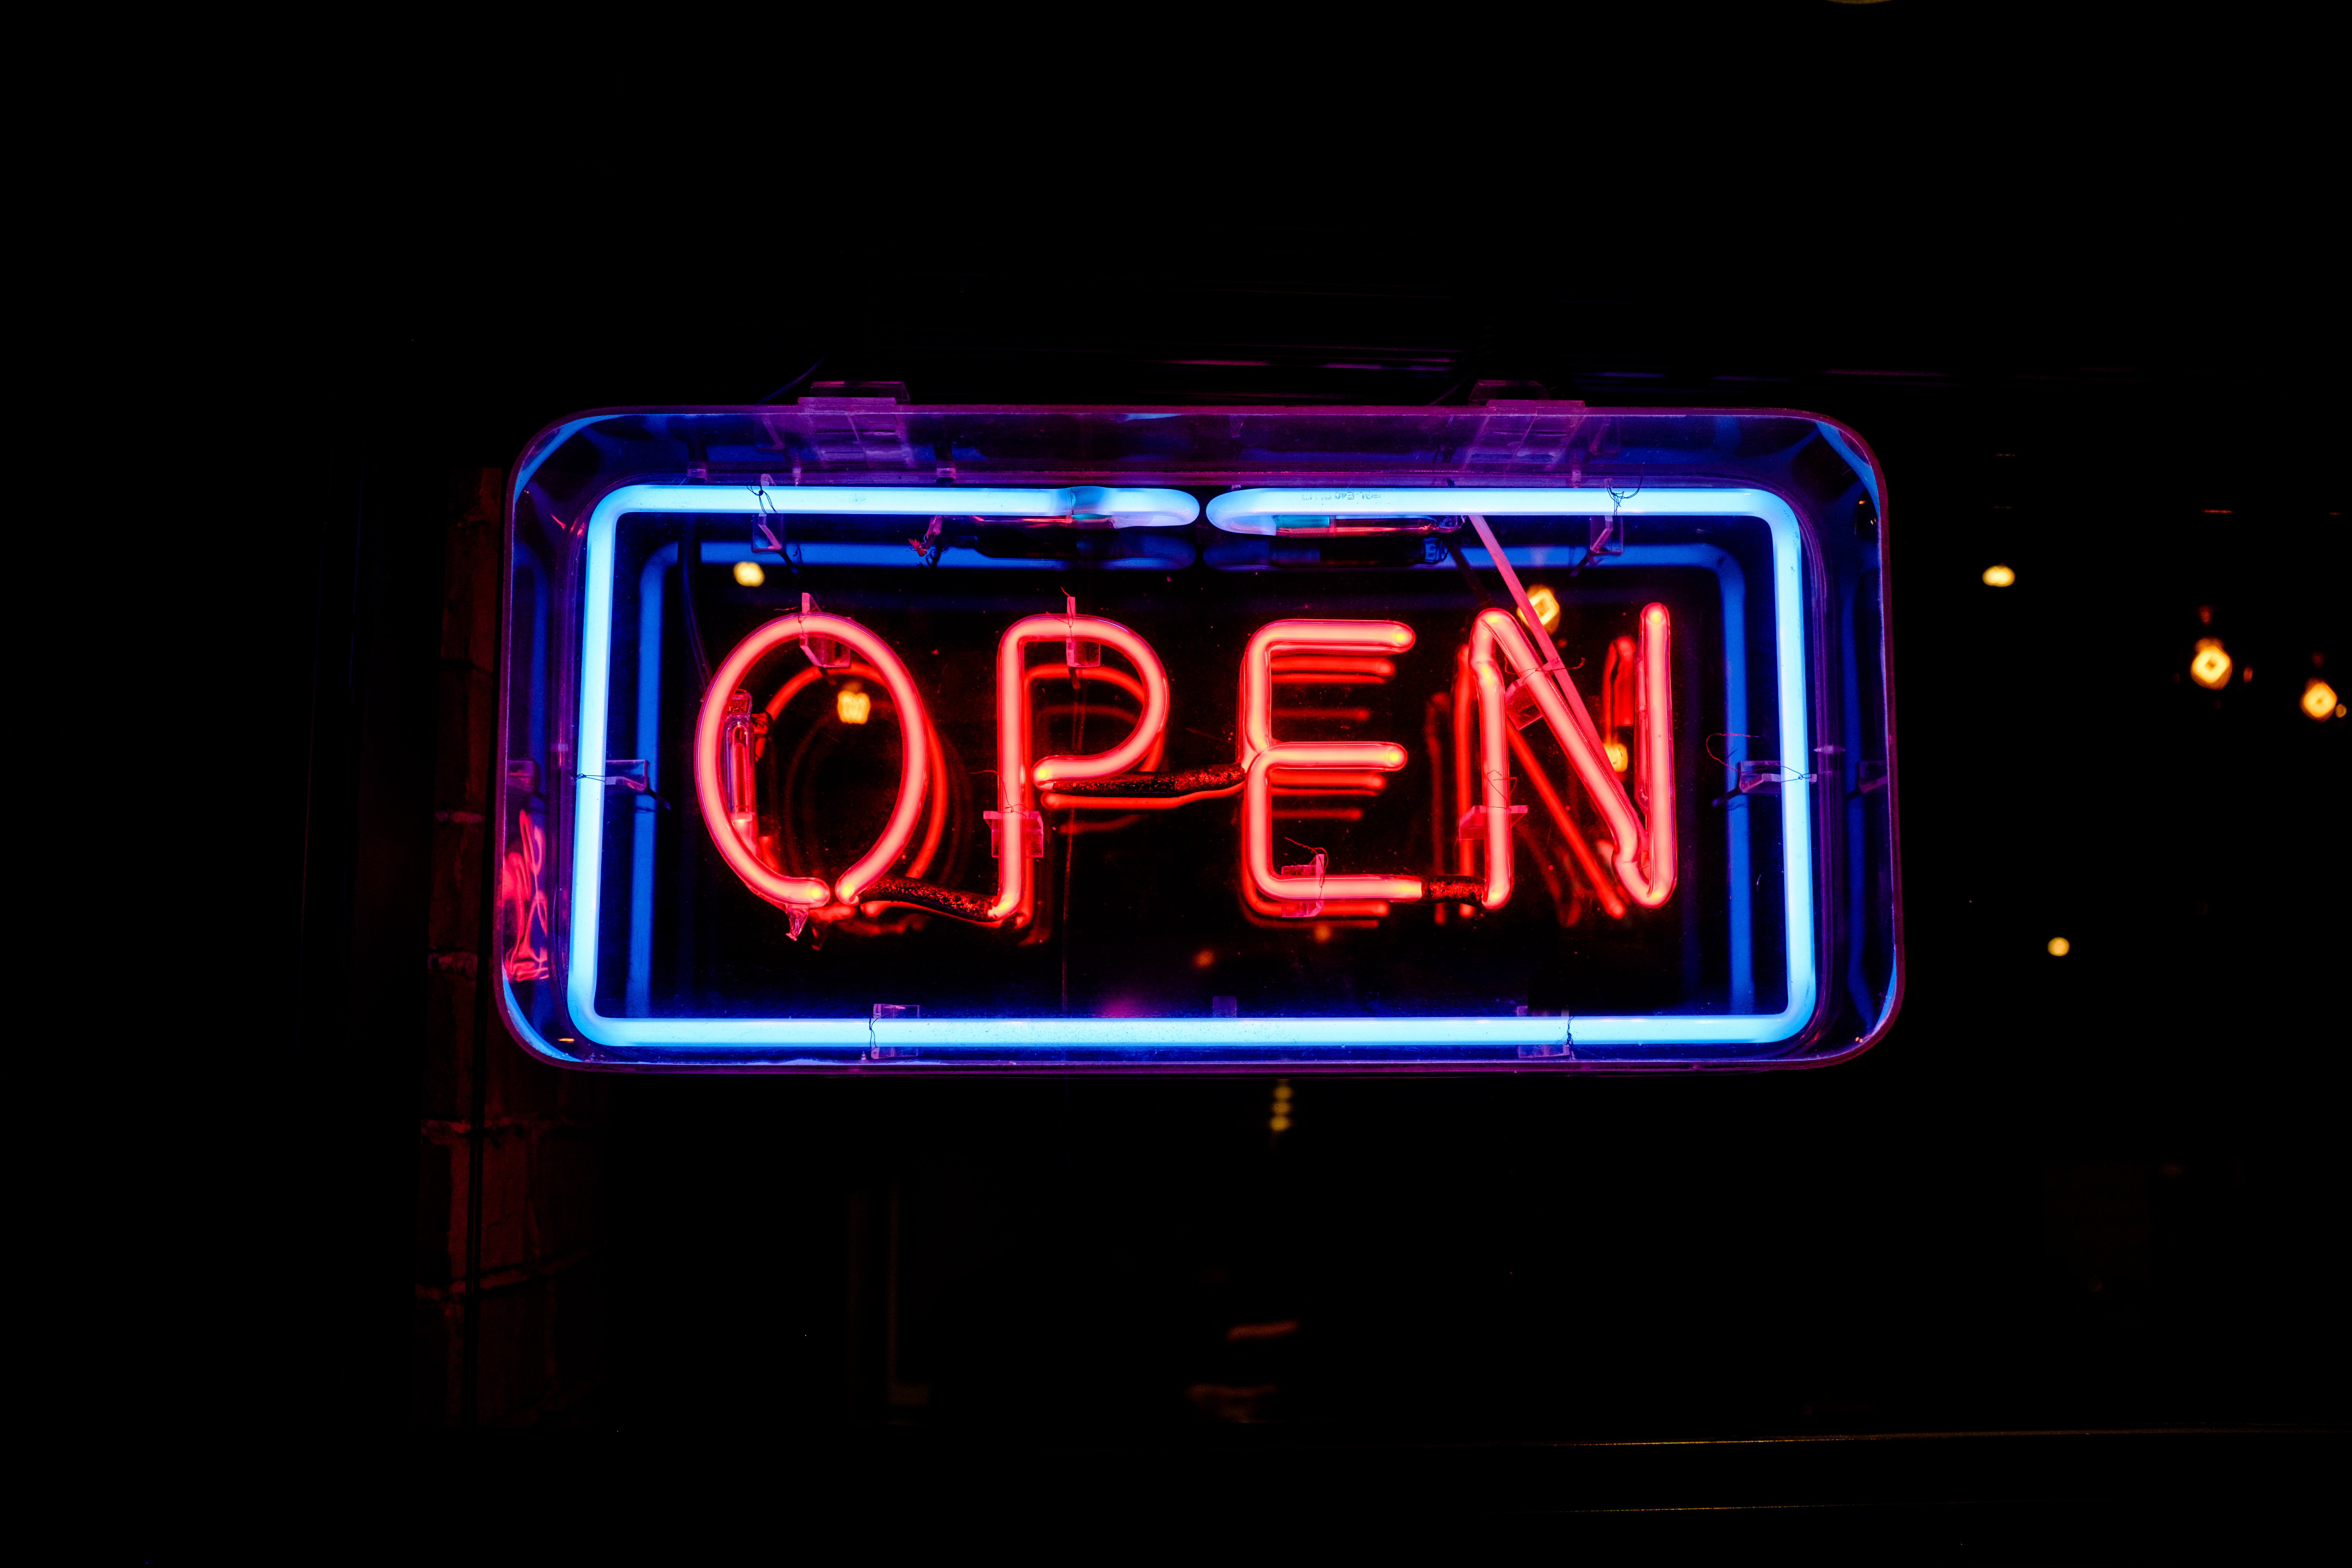 Neon sign that reads "Open" in red letters with a blue border